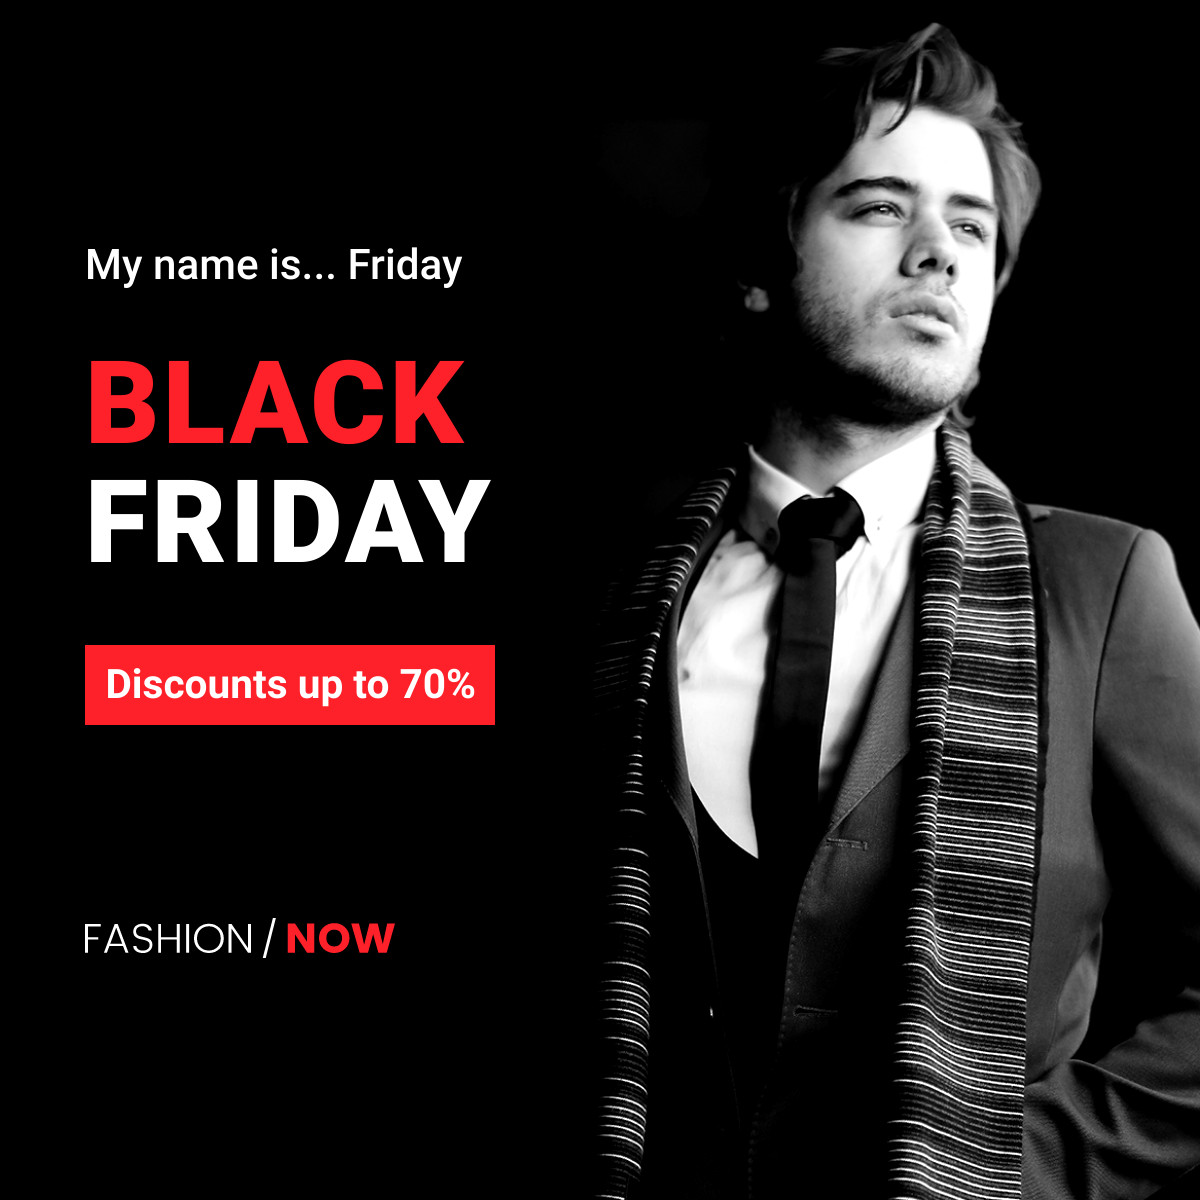 My Name is Black Friday Inline Rectangle 300x250